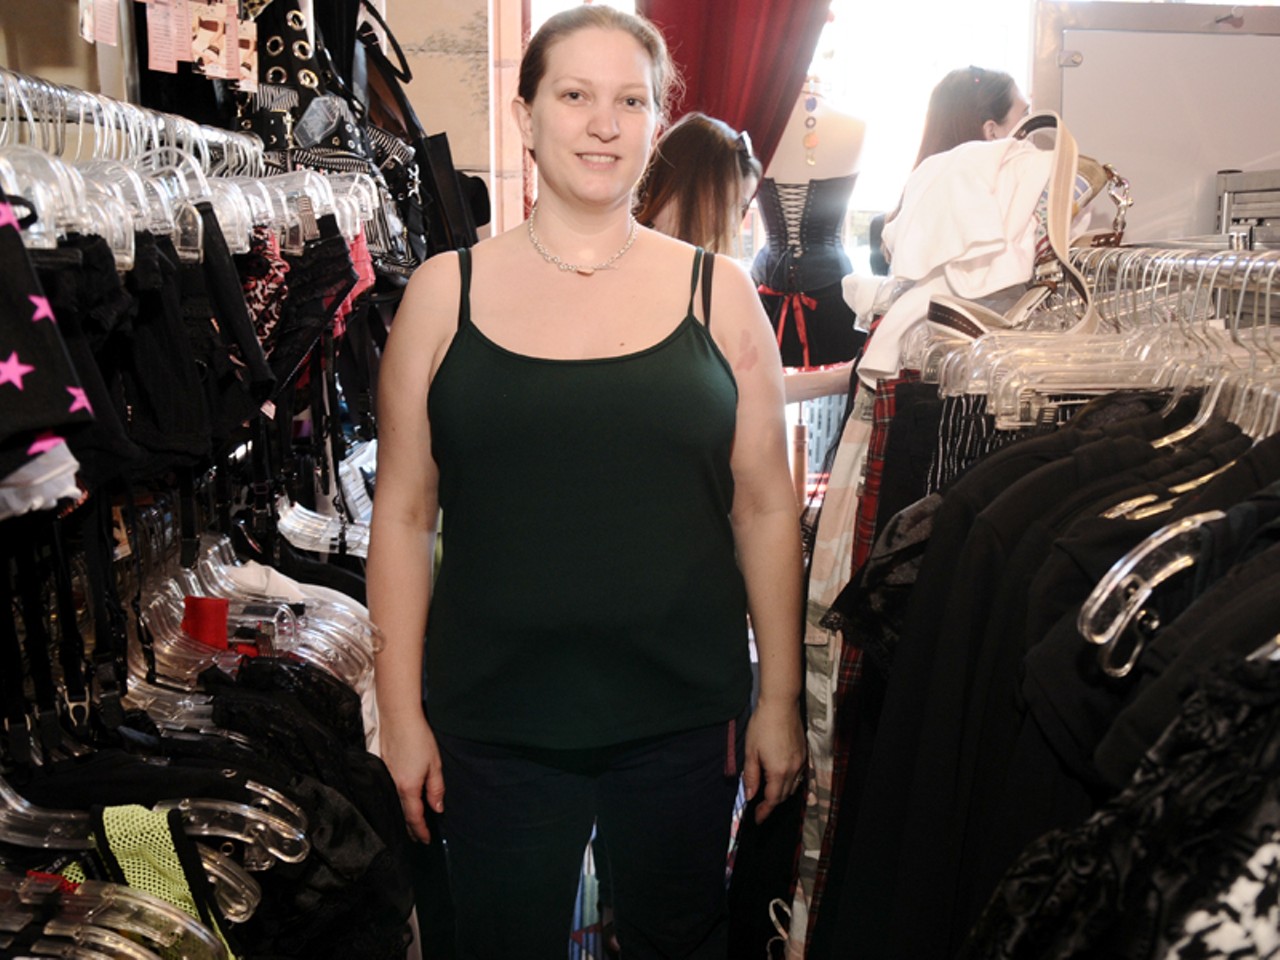 Sabrina owns one other off-the-rack corset. She says this corset's fit and quality is better.